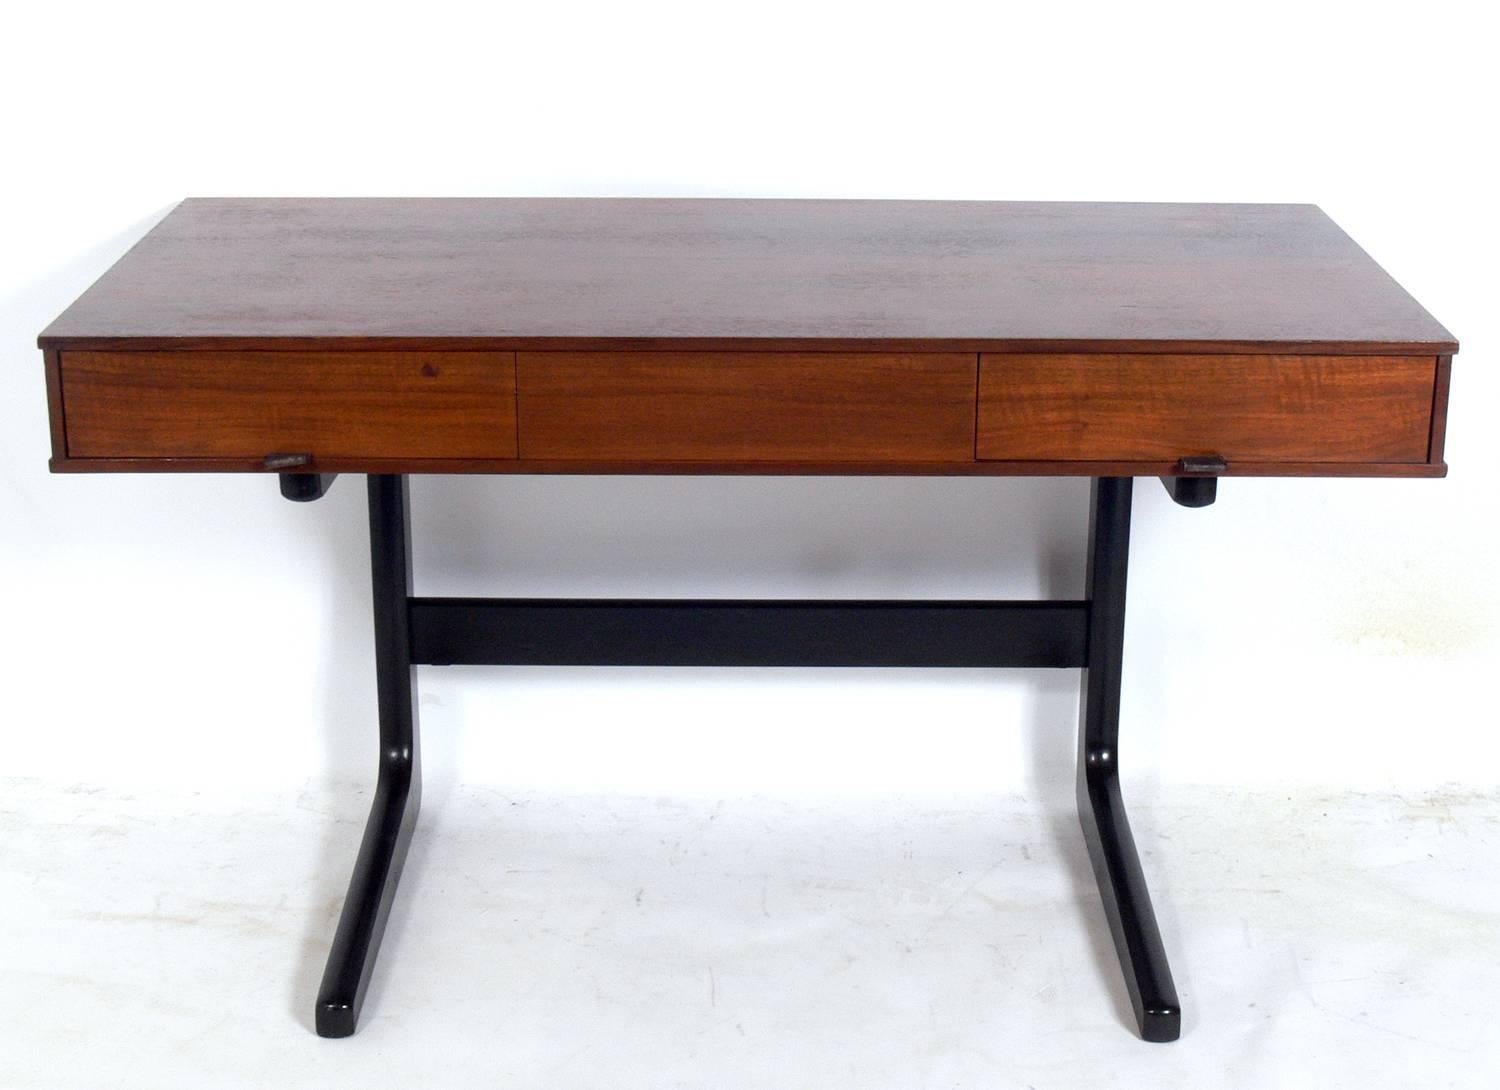 Clean lined midcentury desk with leather pulls, believed to be American, circa 1950s.